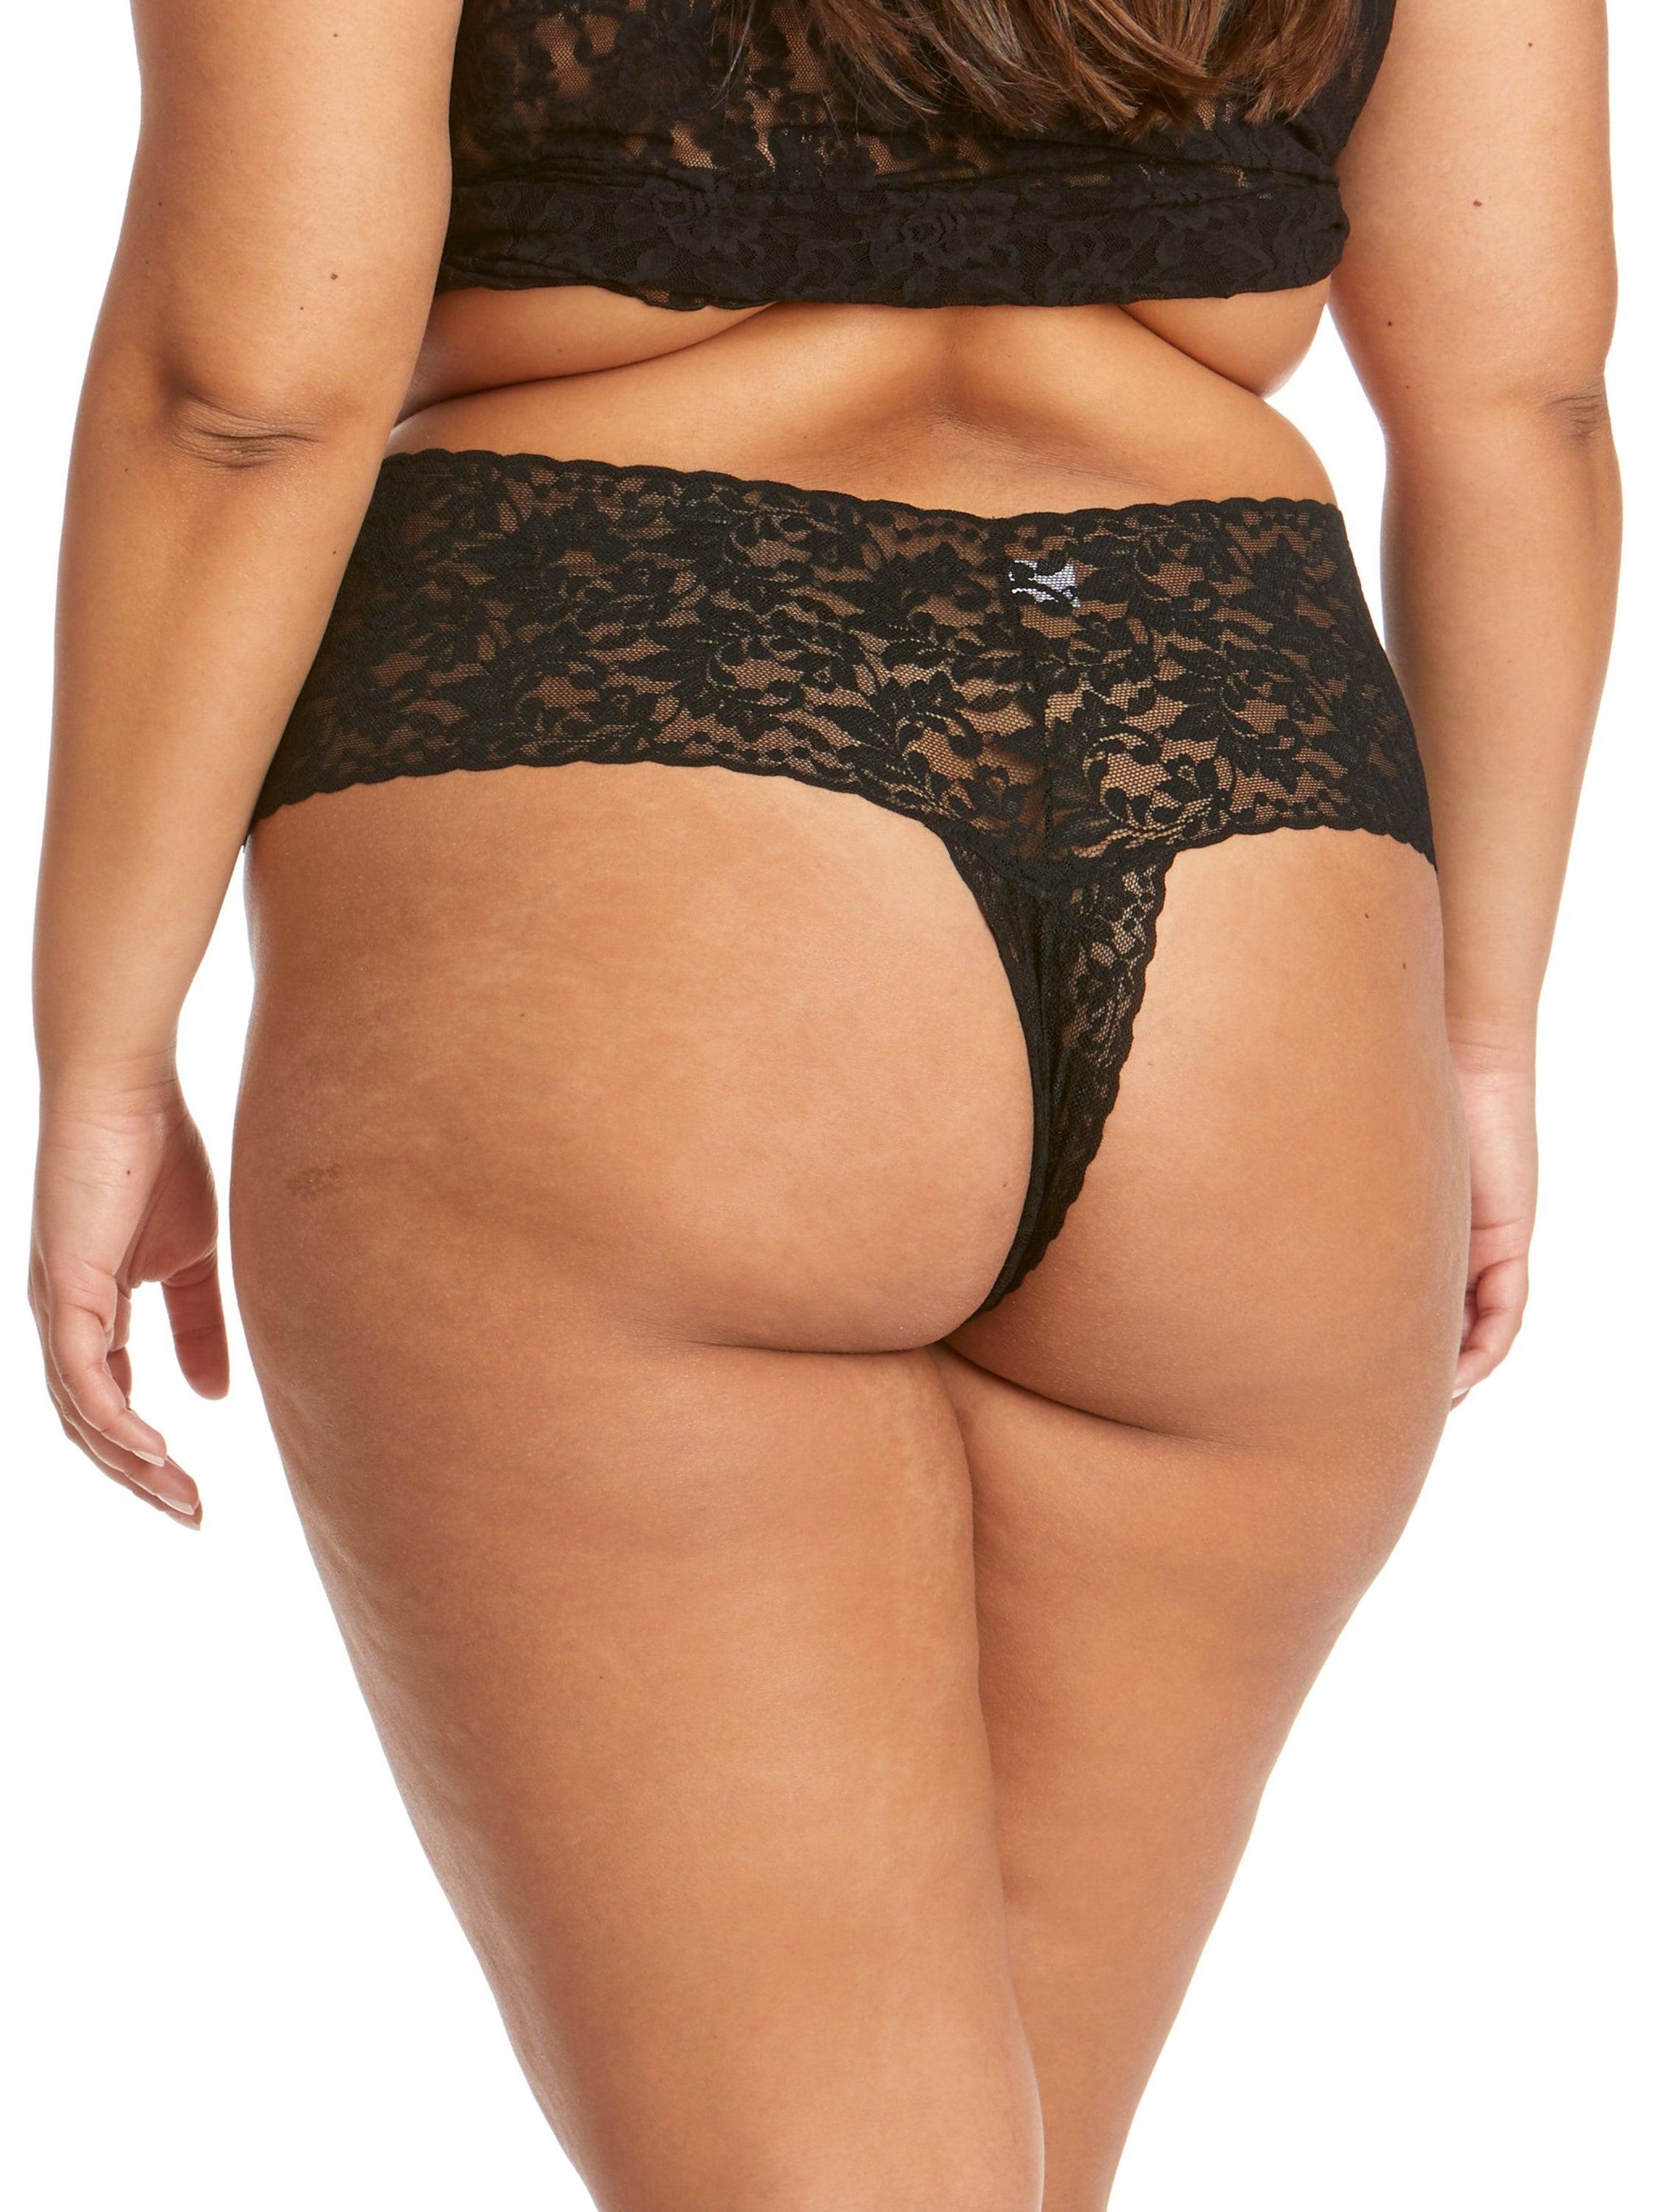 Exotic Open Crotch Lacy Thong - INFINITE LINX FASHION